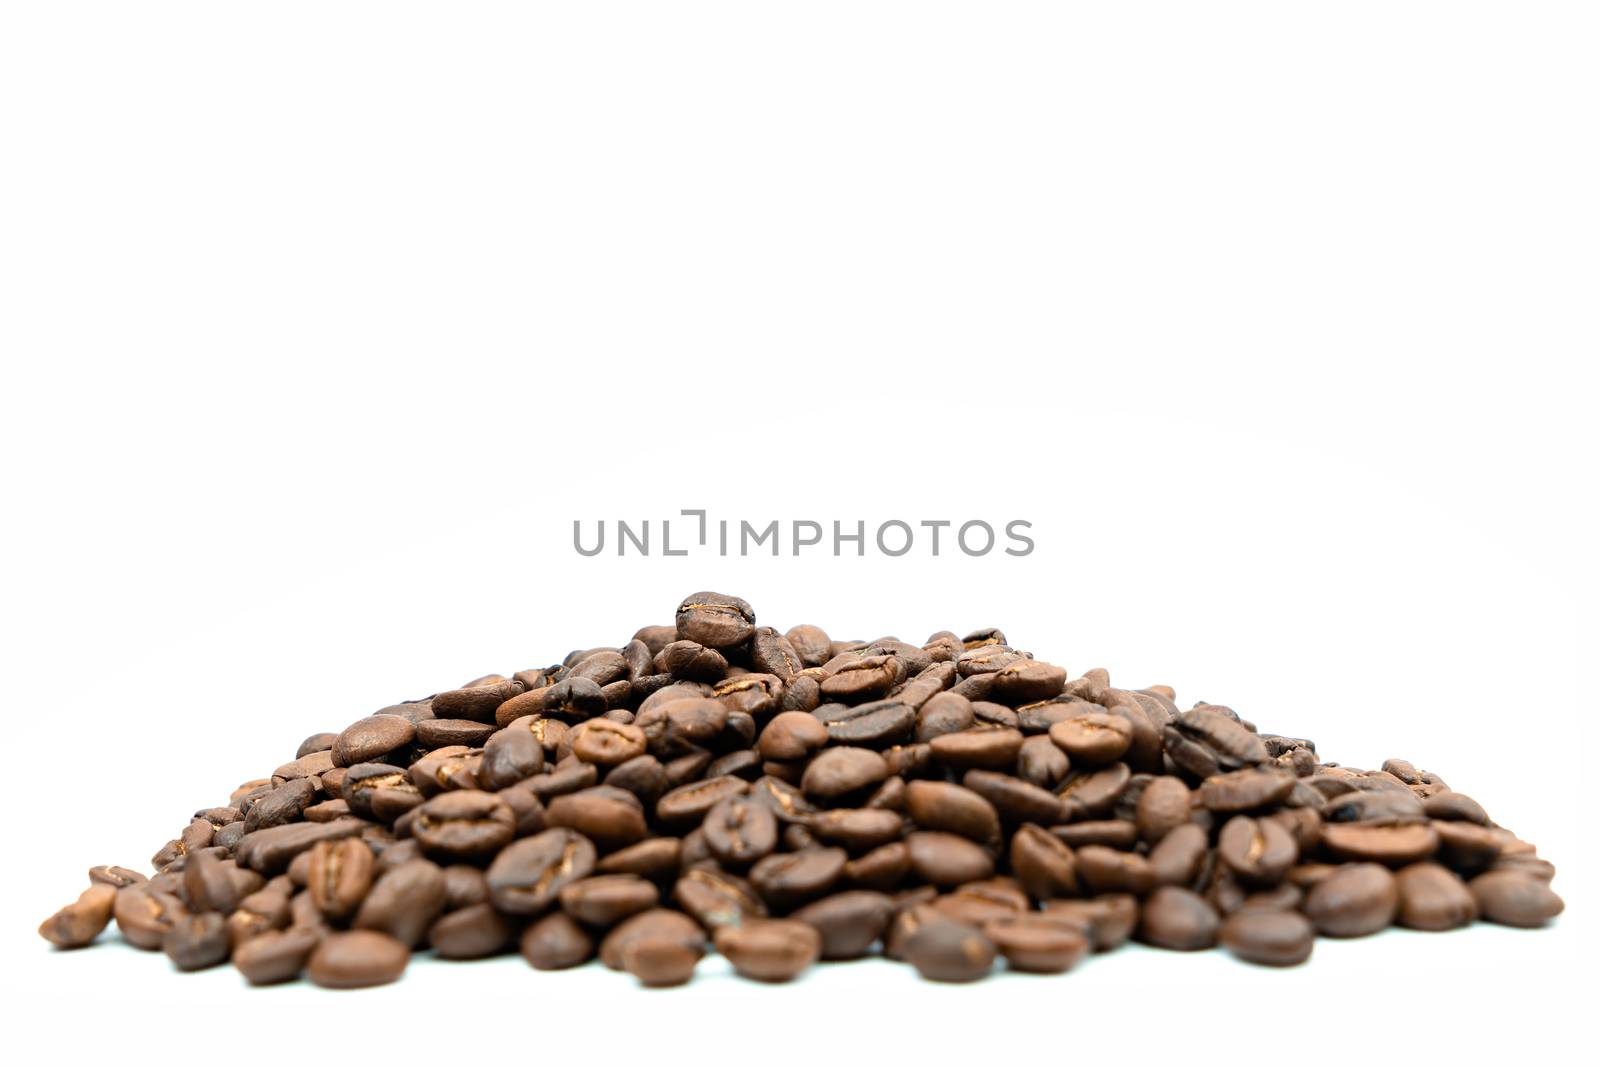 Coffee beans pile on isolated white background by Buttus_casso